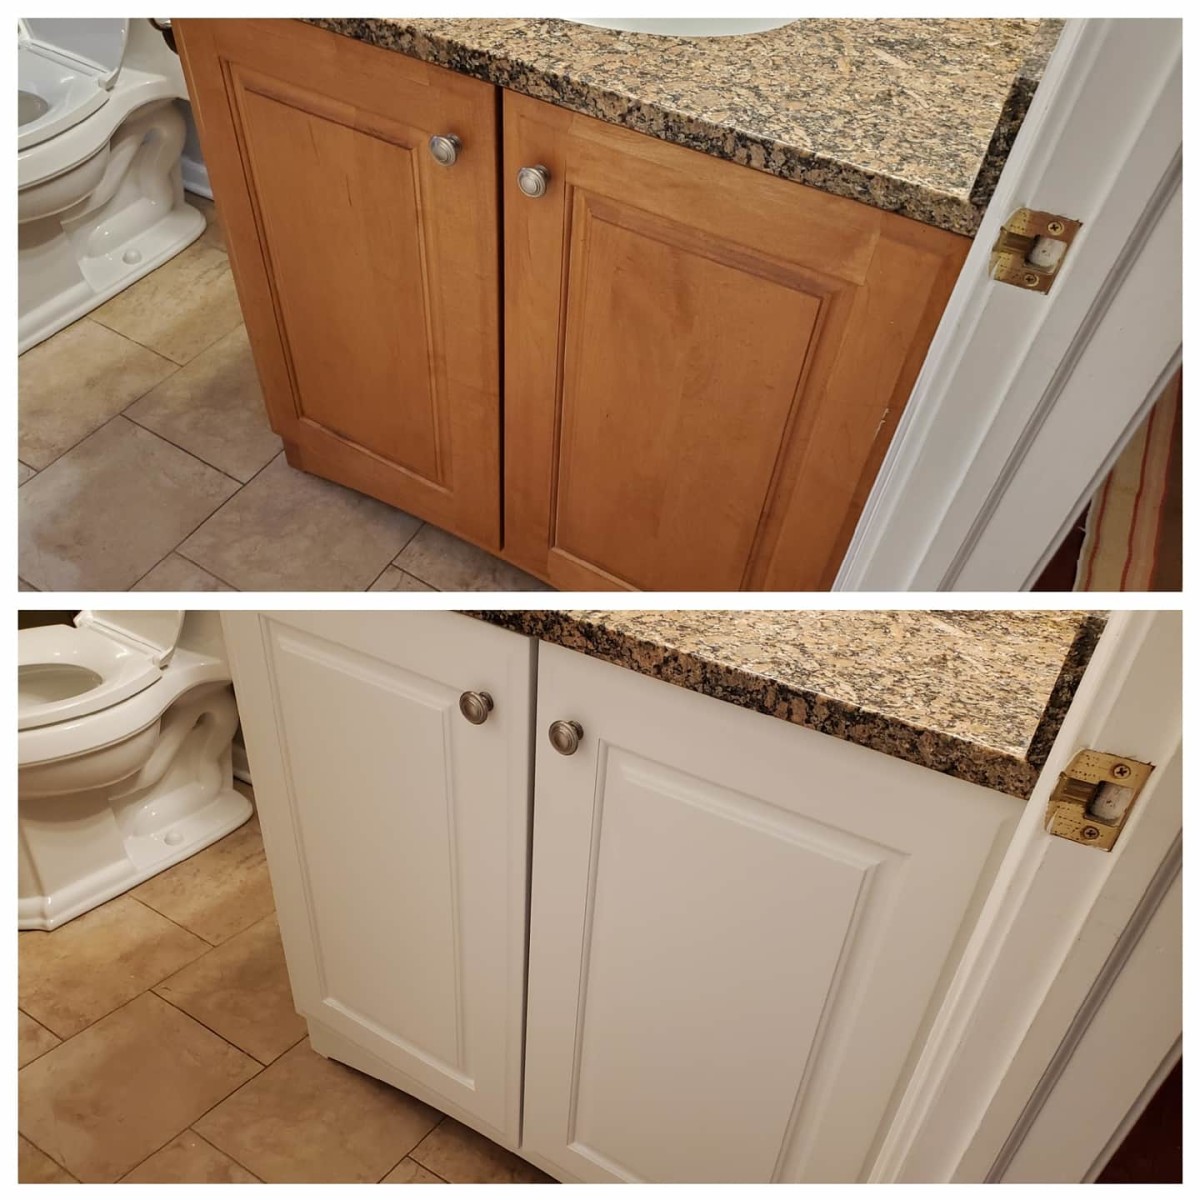 Tips For Painting A Bathroom Vanity, How Do You Paint A Bathroom Cabinet